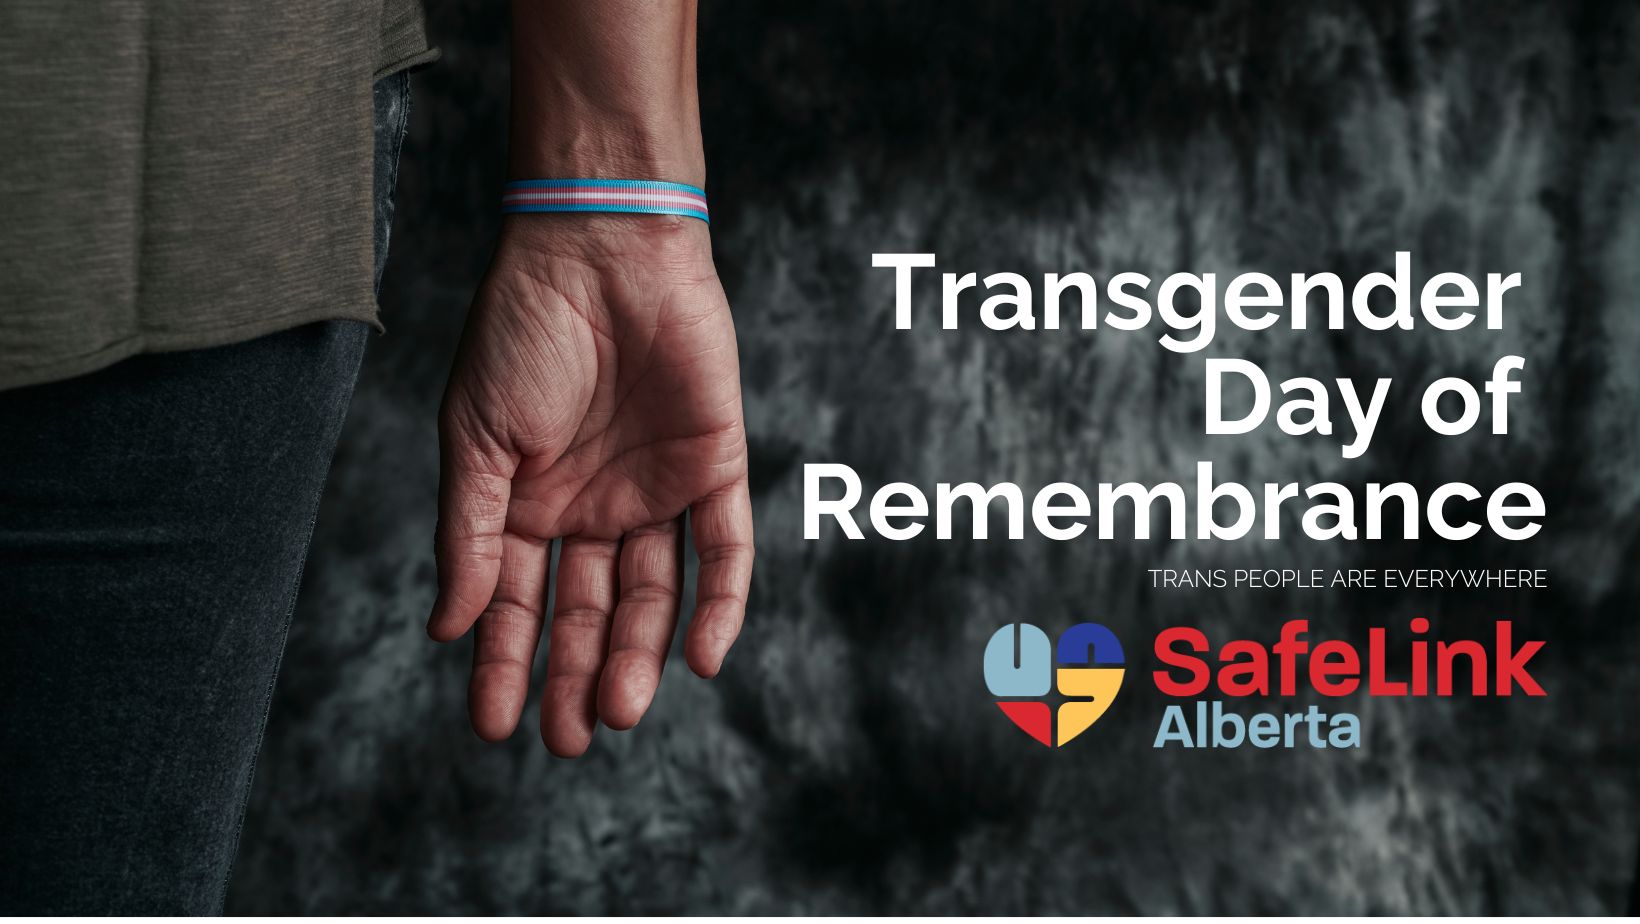 Featured image for “International Transgender Day of Remembrance”